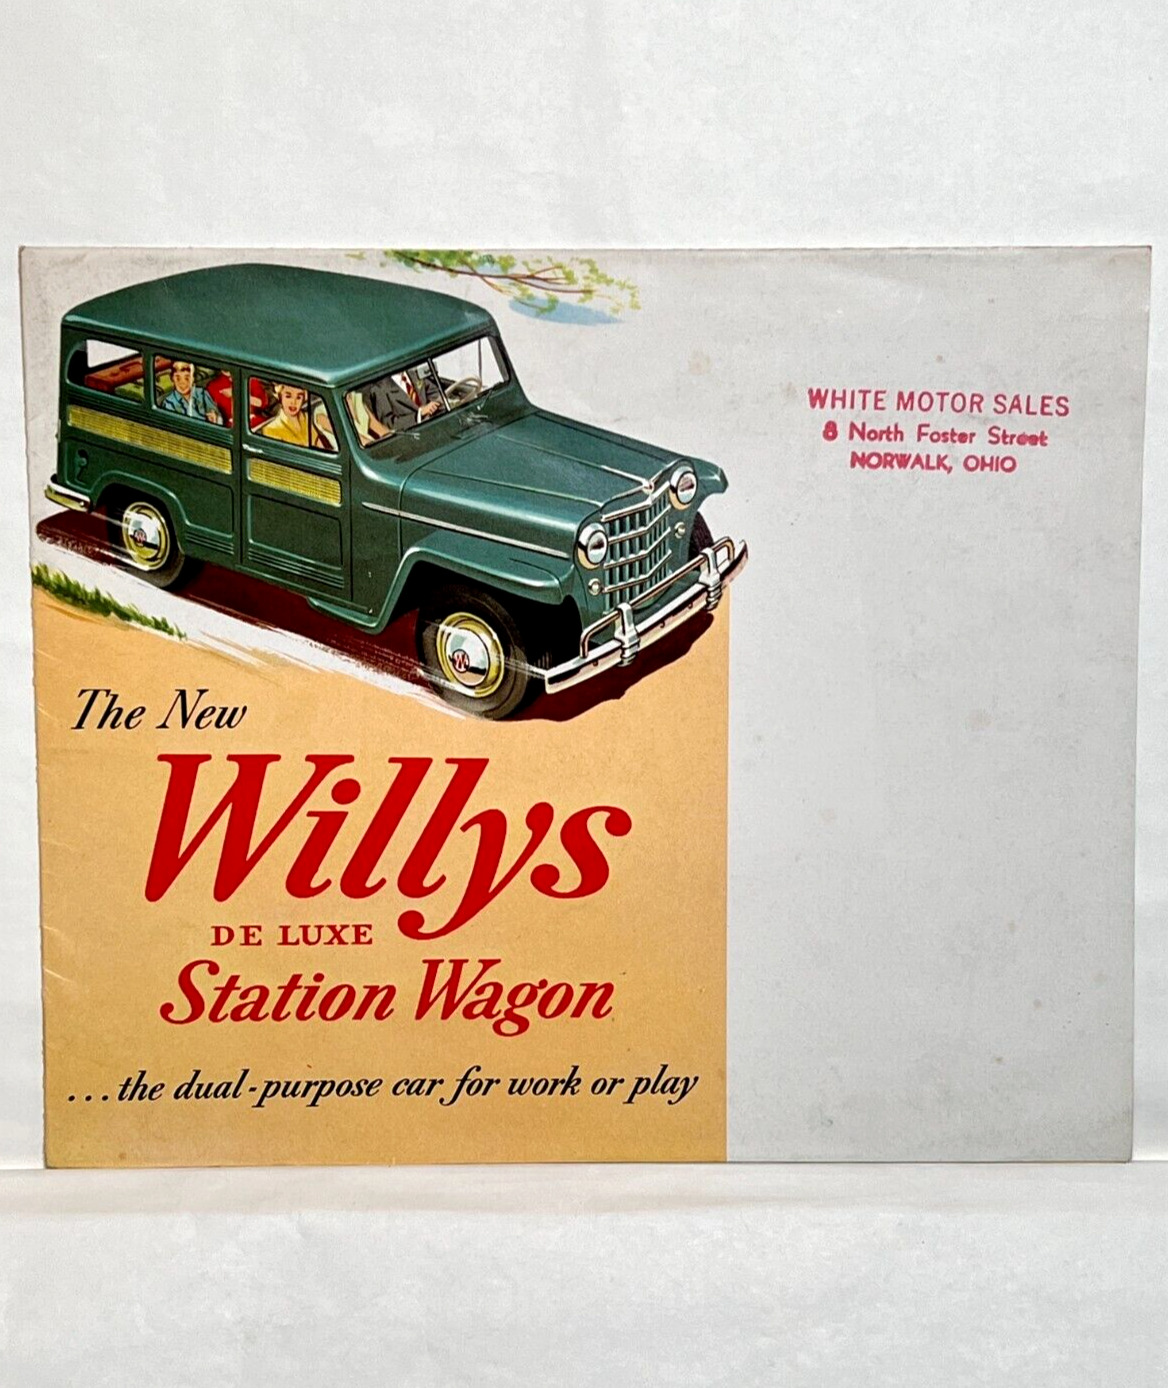 Vintage 1954 Willys DeLuxe Station Wagon Jeep Truck 4-6 Cylinder Sales Brochure